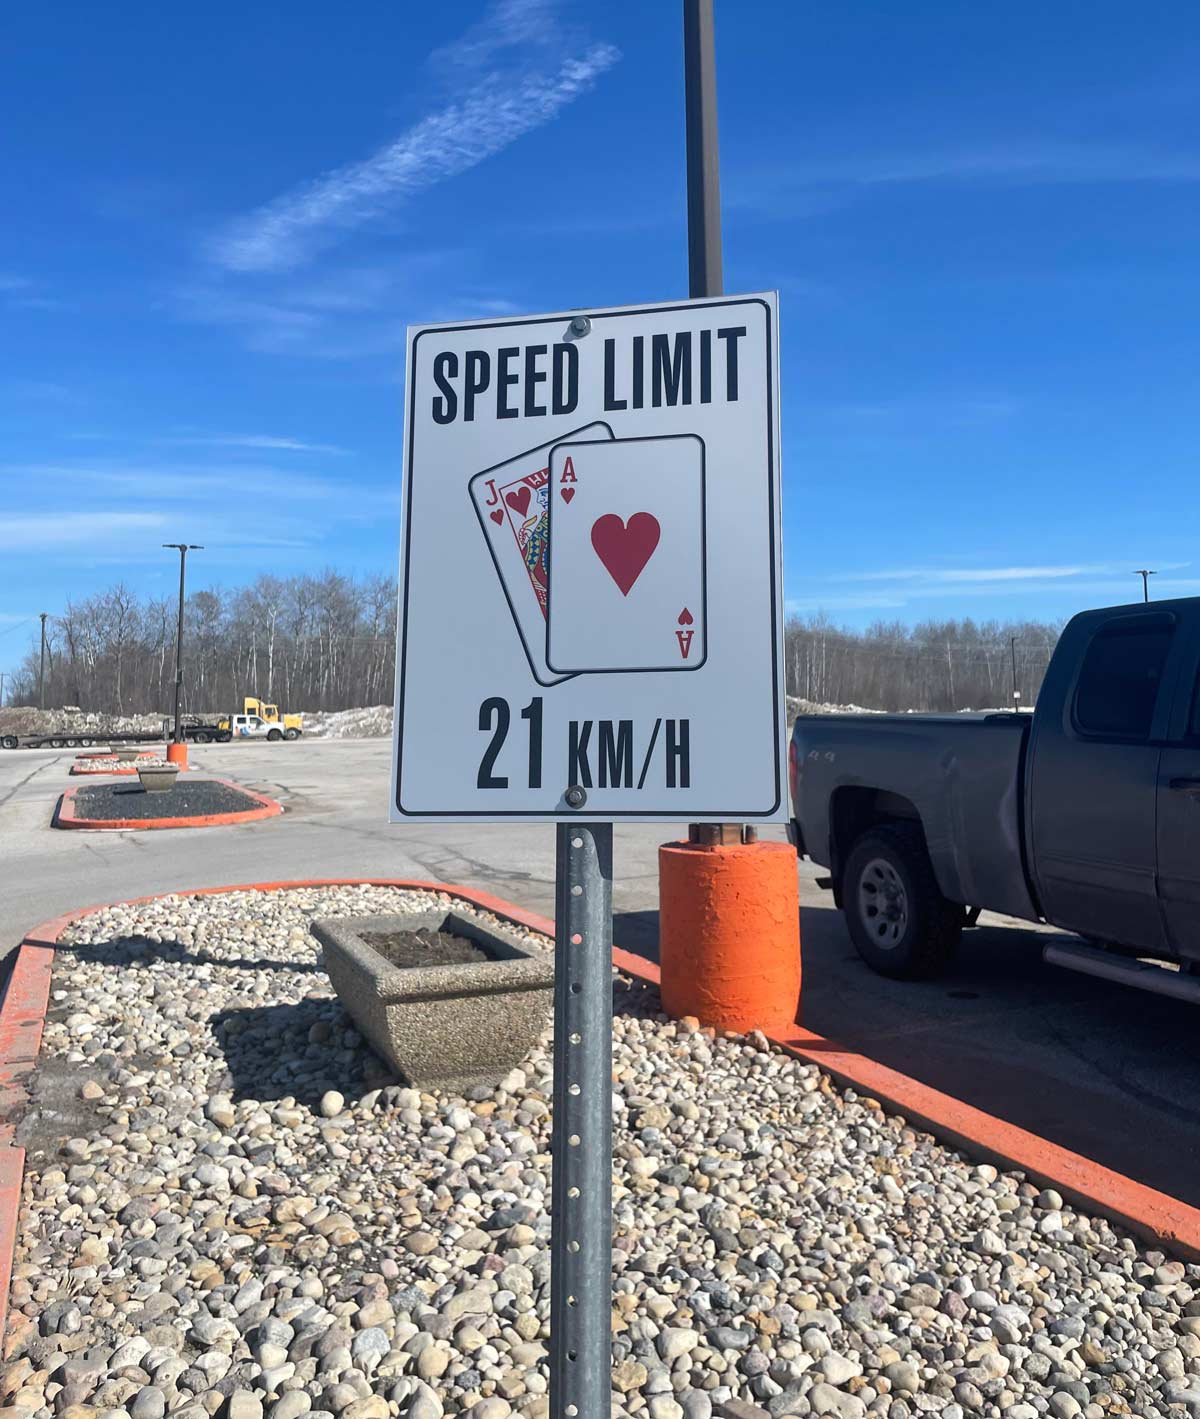 Casino parking lot has a speed limit of 21kmh